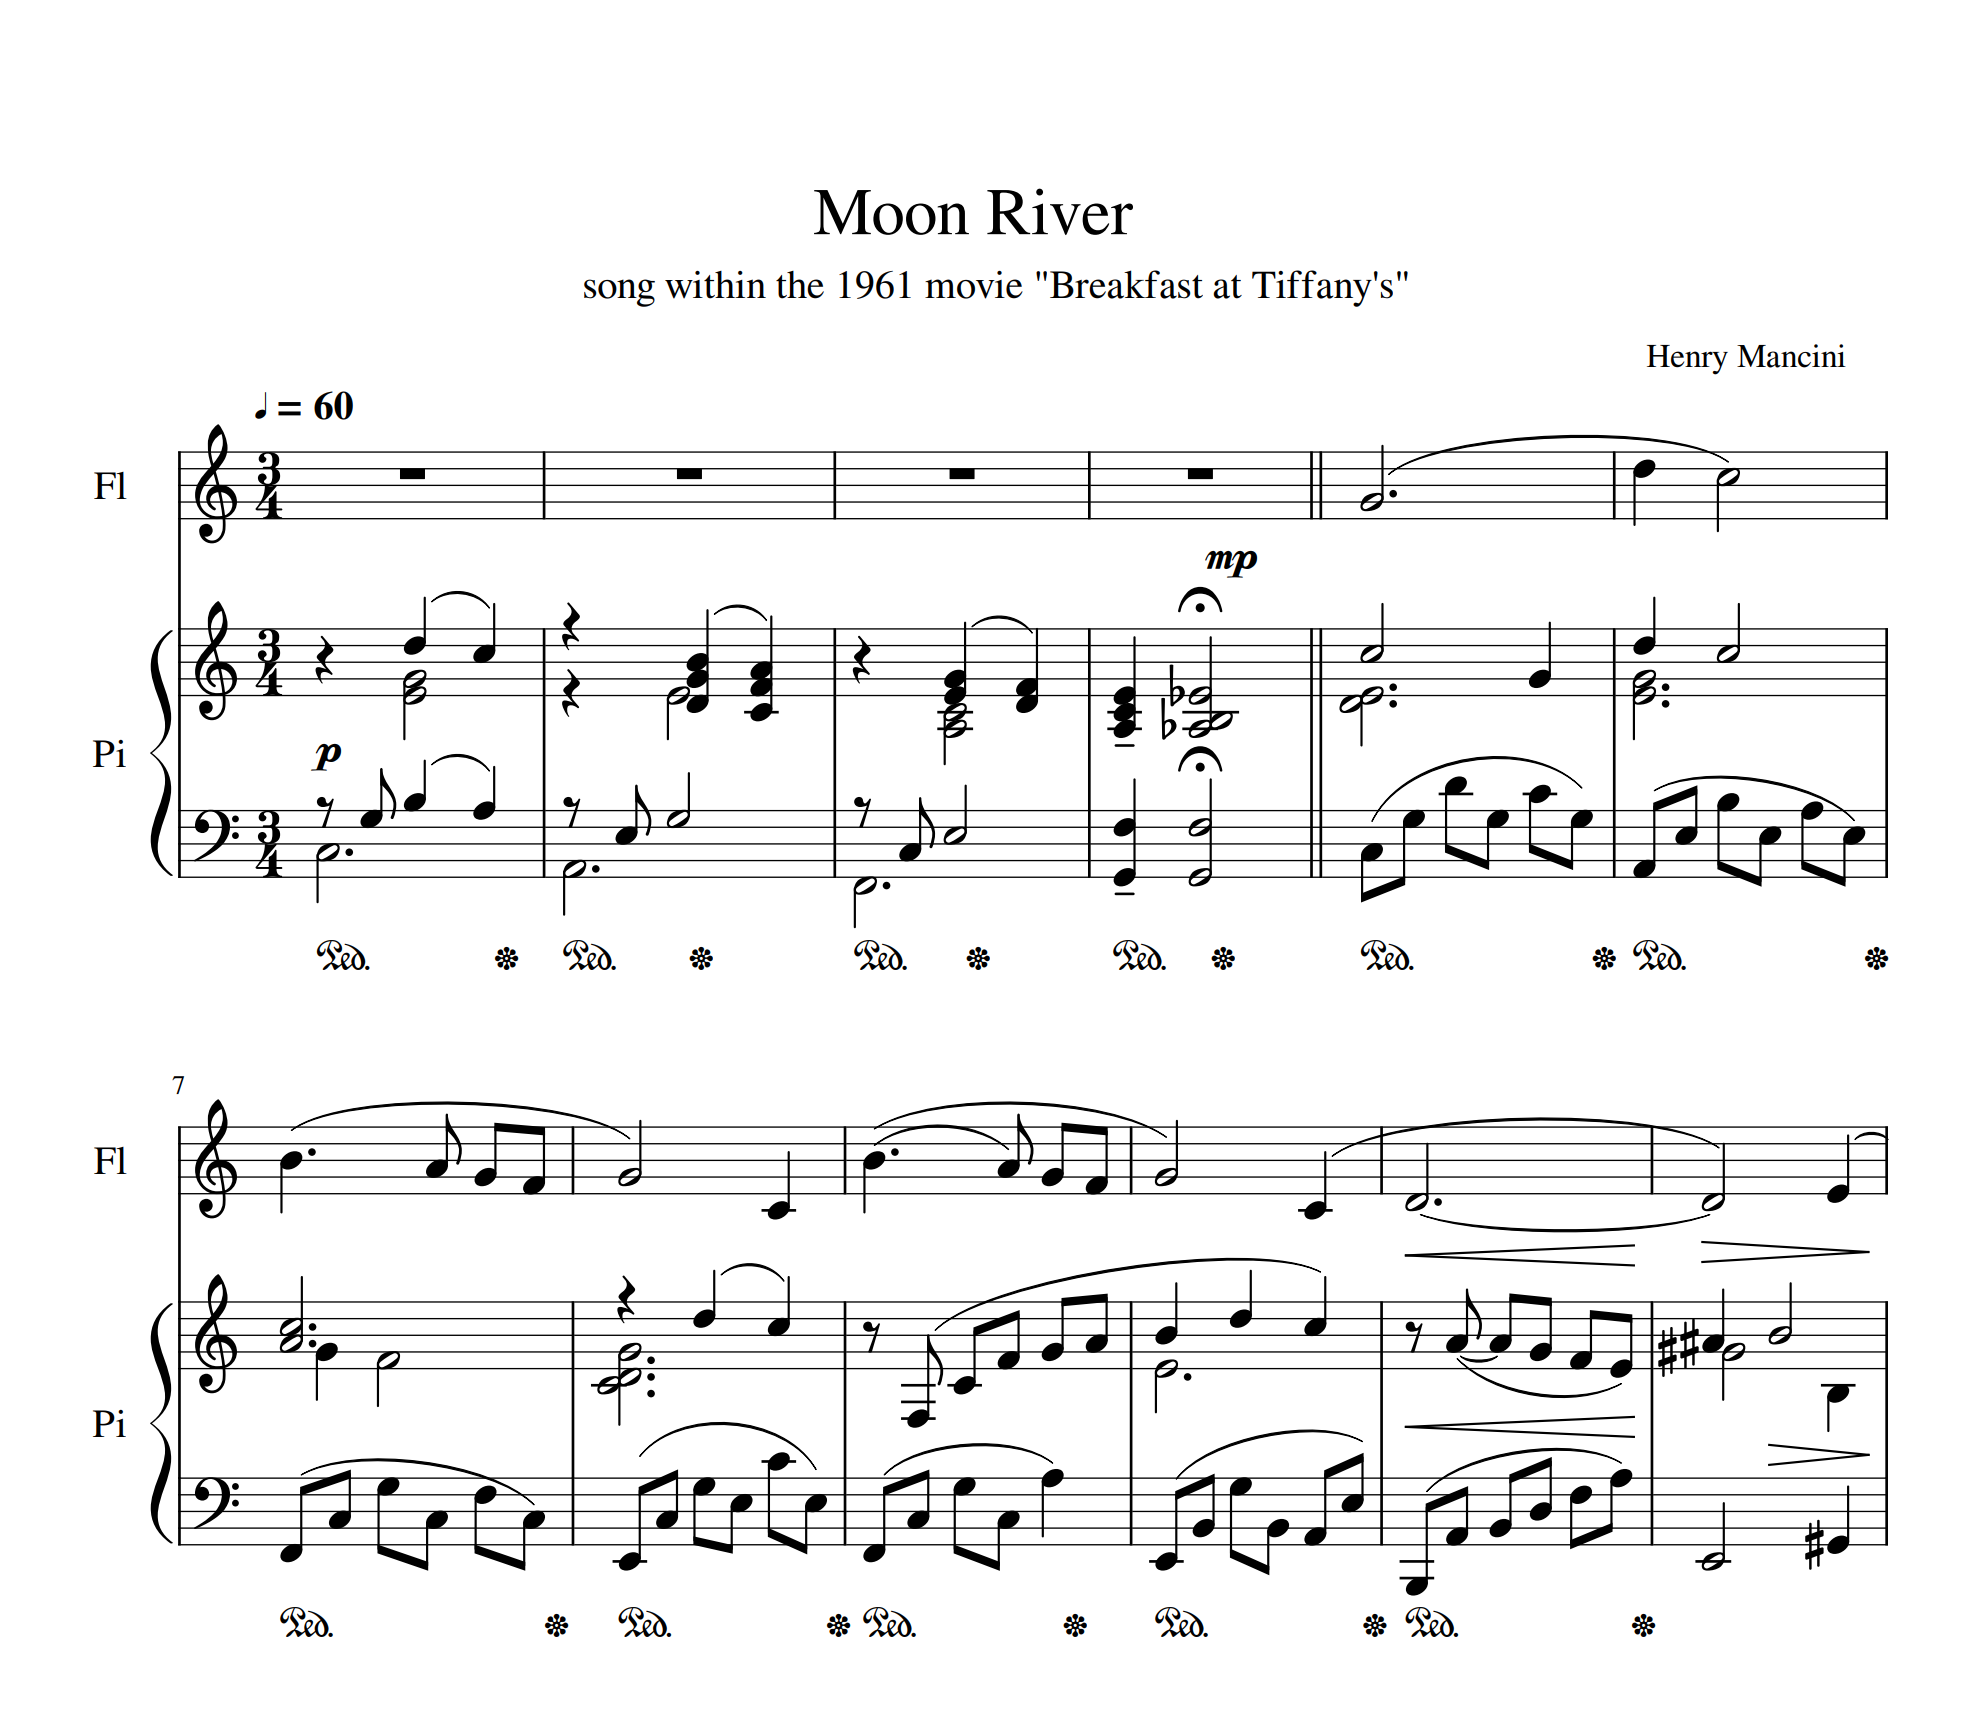 Henry Mancini - Moon River sheet music for flute and piano